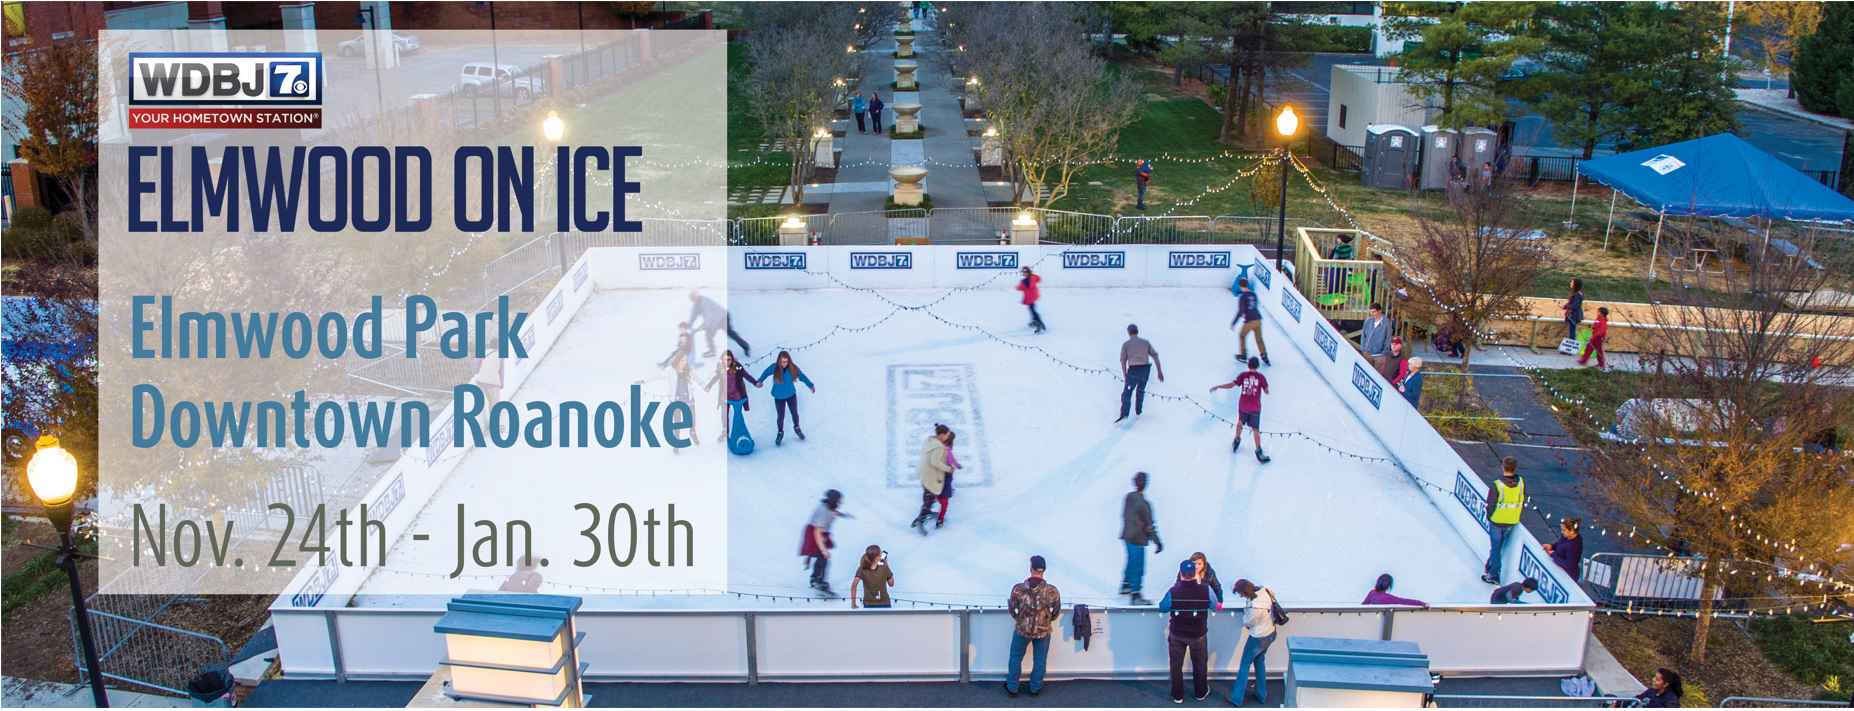 https://www.downtownroanoke.org/events/signature-events/elmwood-on-ice